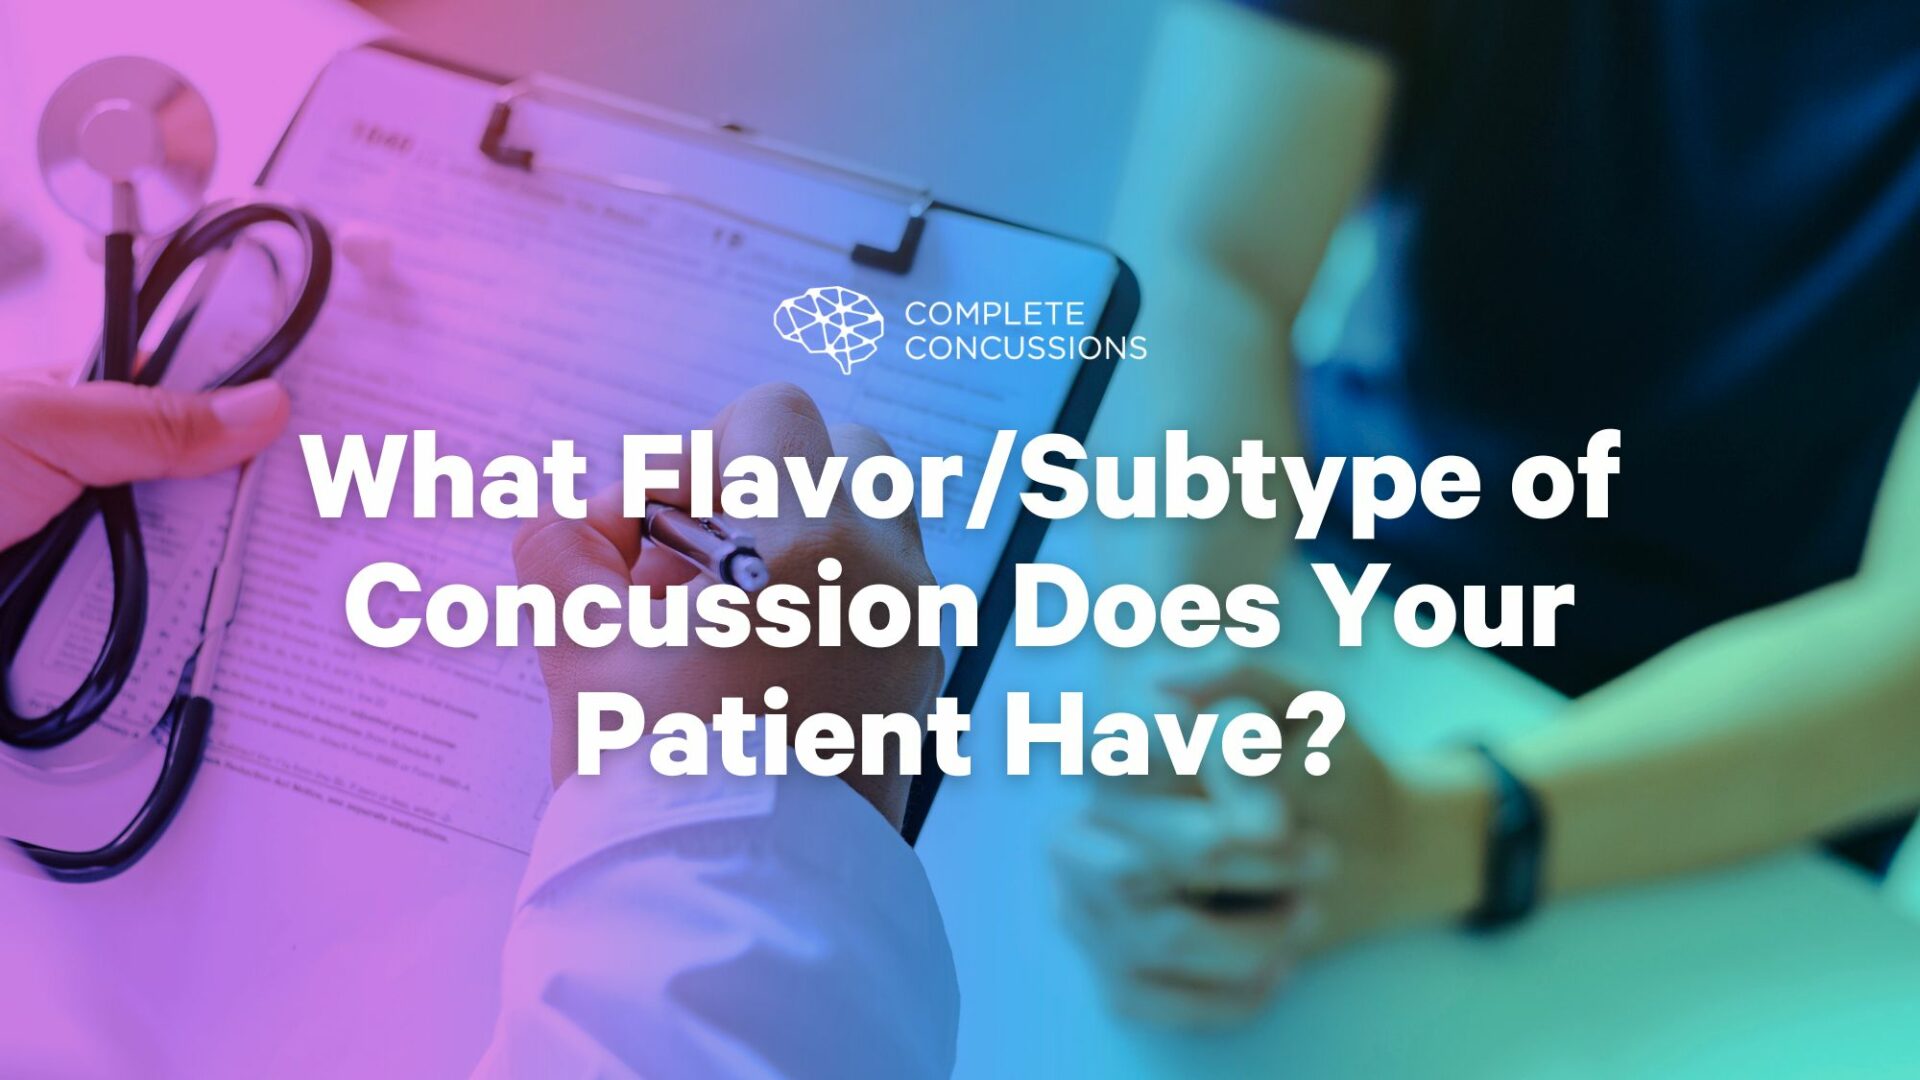 What Flavor/Subtype of Concussion Does Your Patient Have?